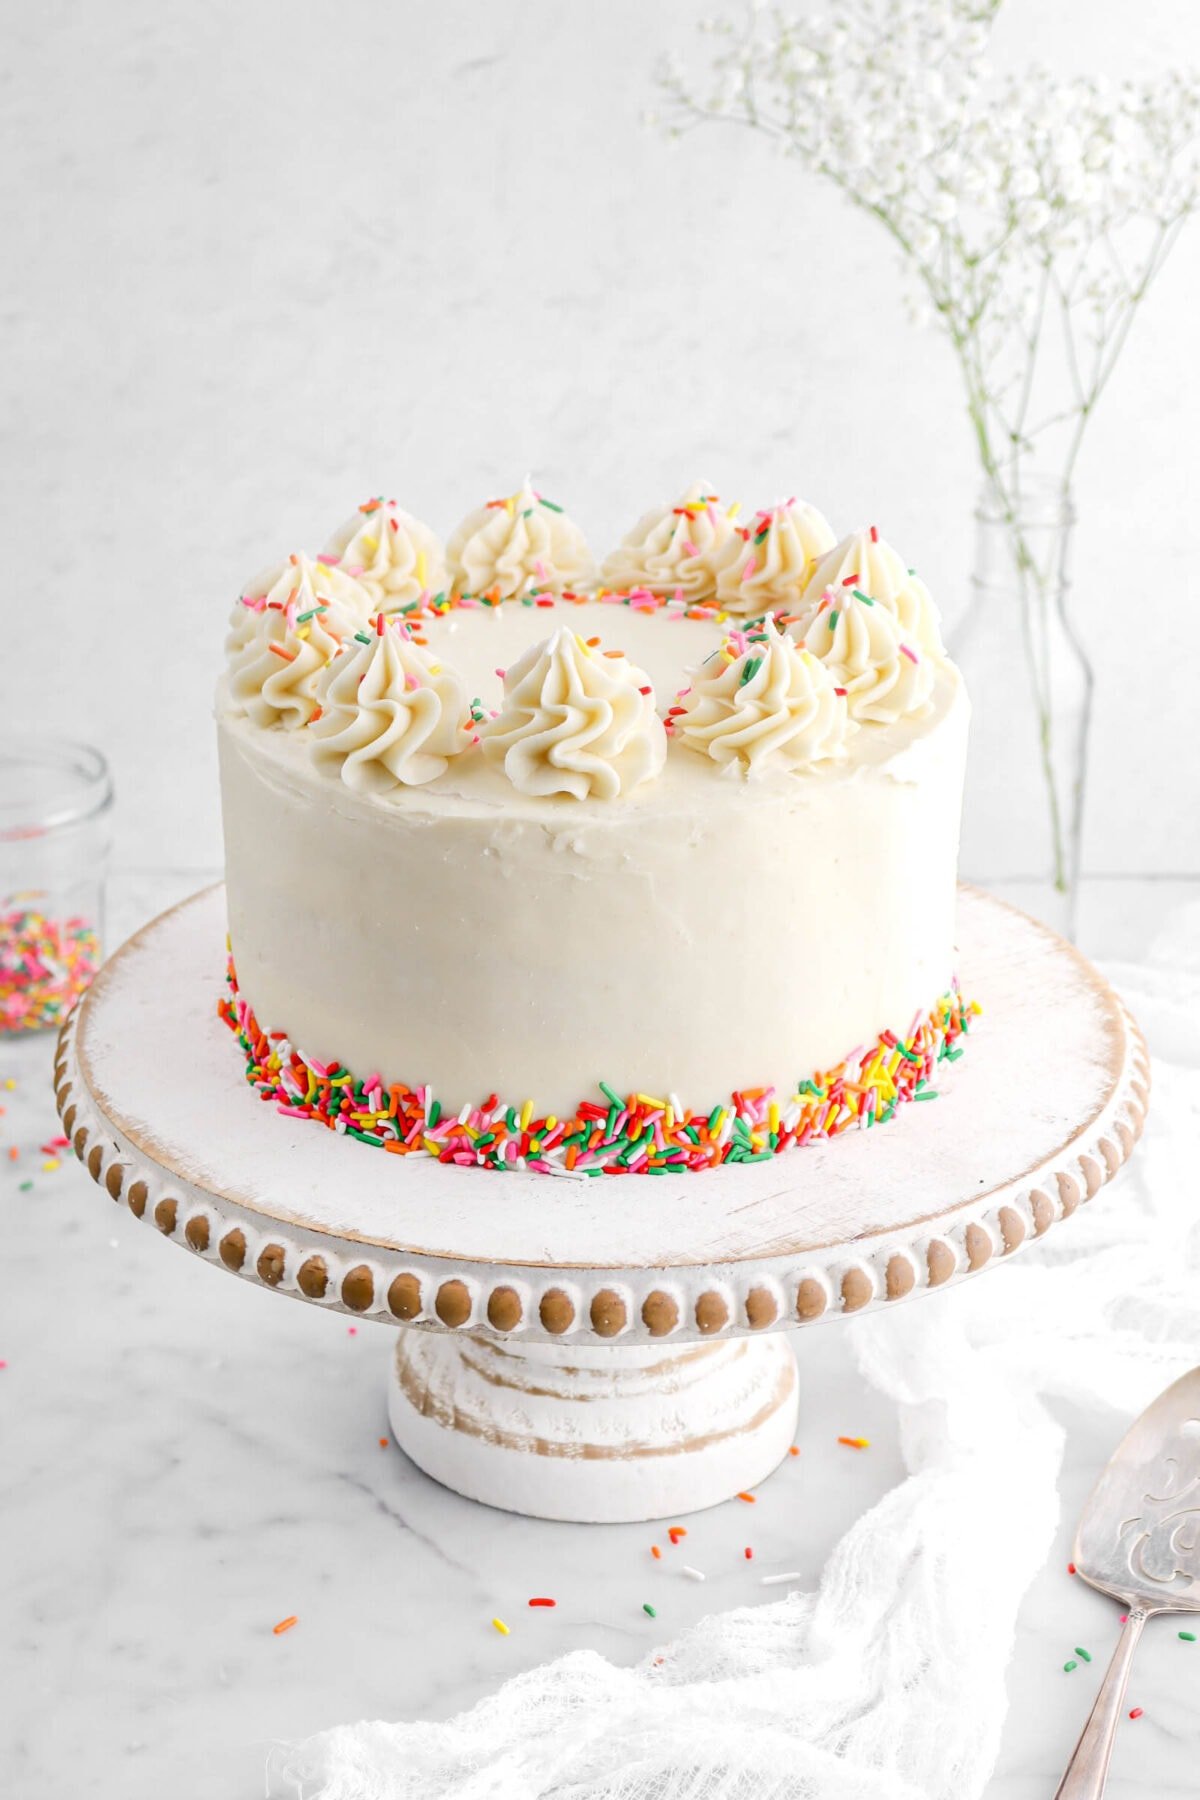 angled close up of funfetti cake on cake stand with rainbow sprinkles around the base of the cake and piped frosting on the top of the cake with extra sprinkles.